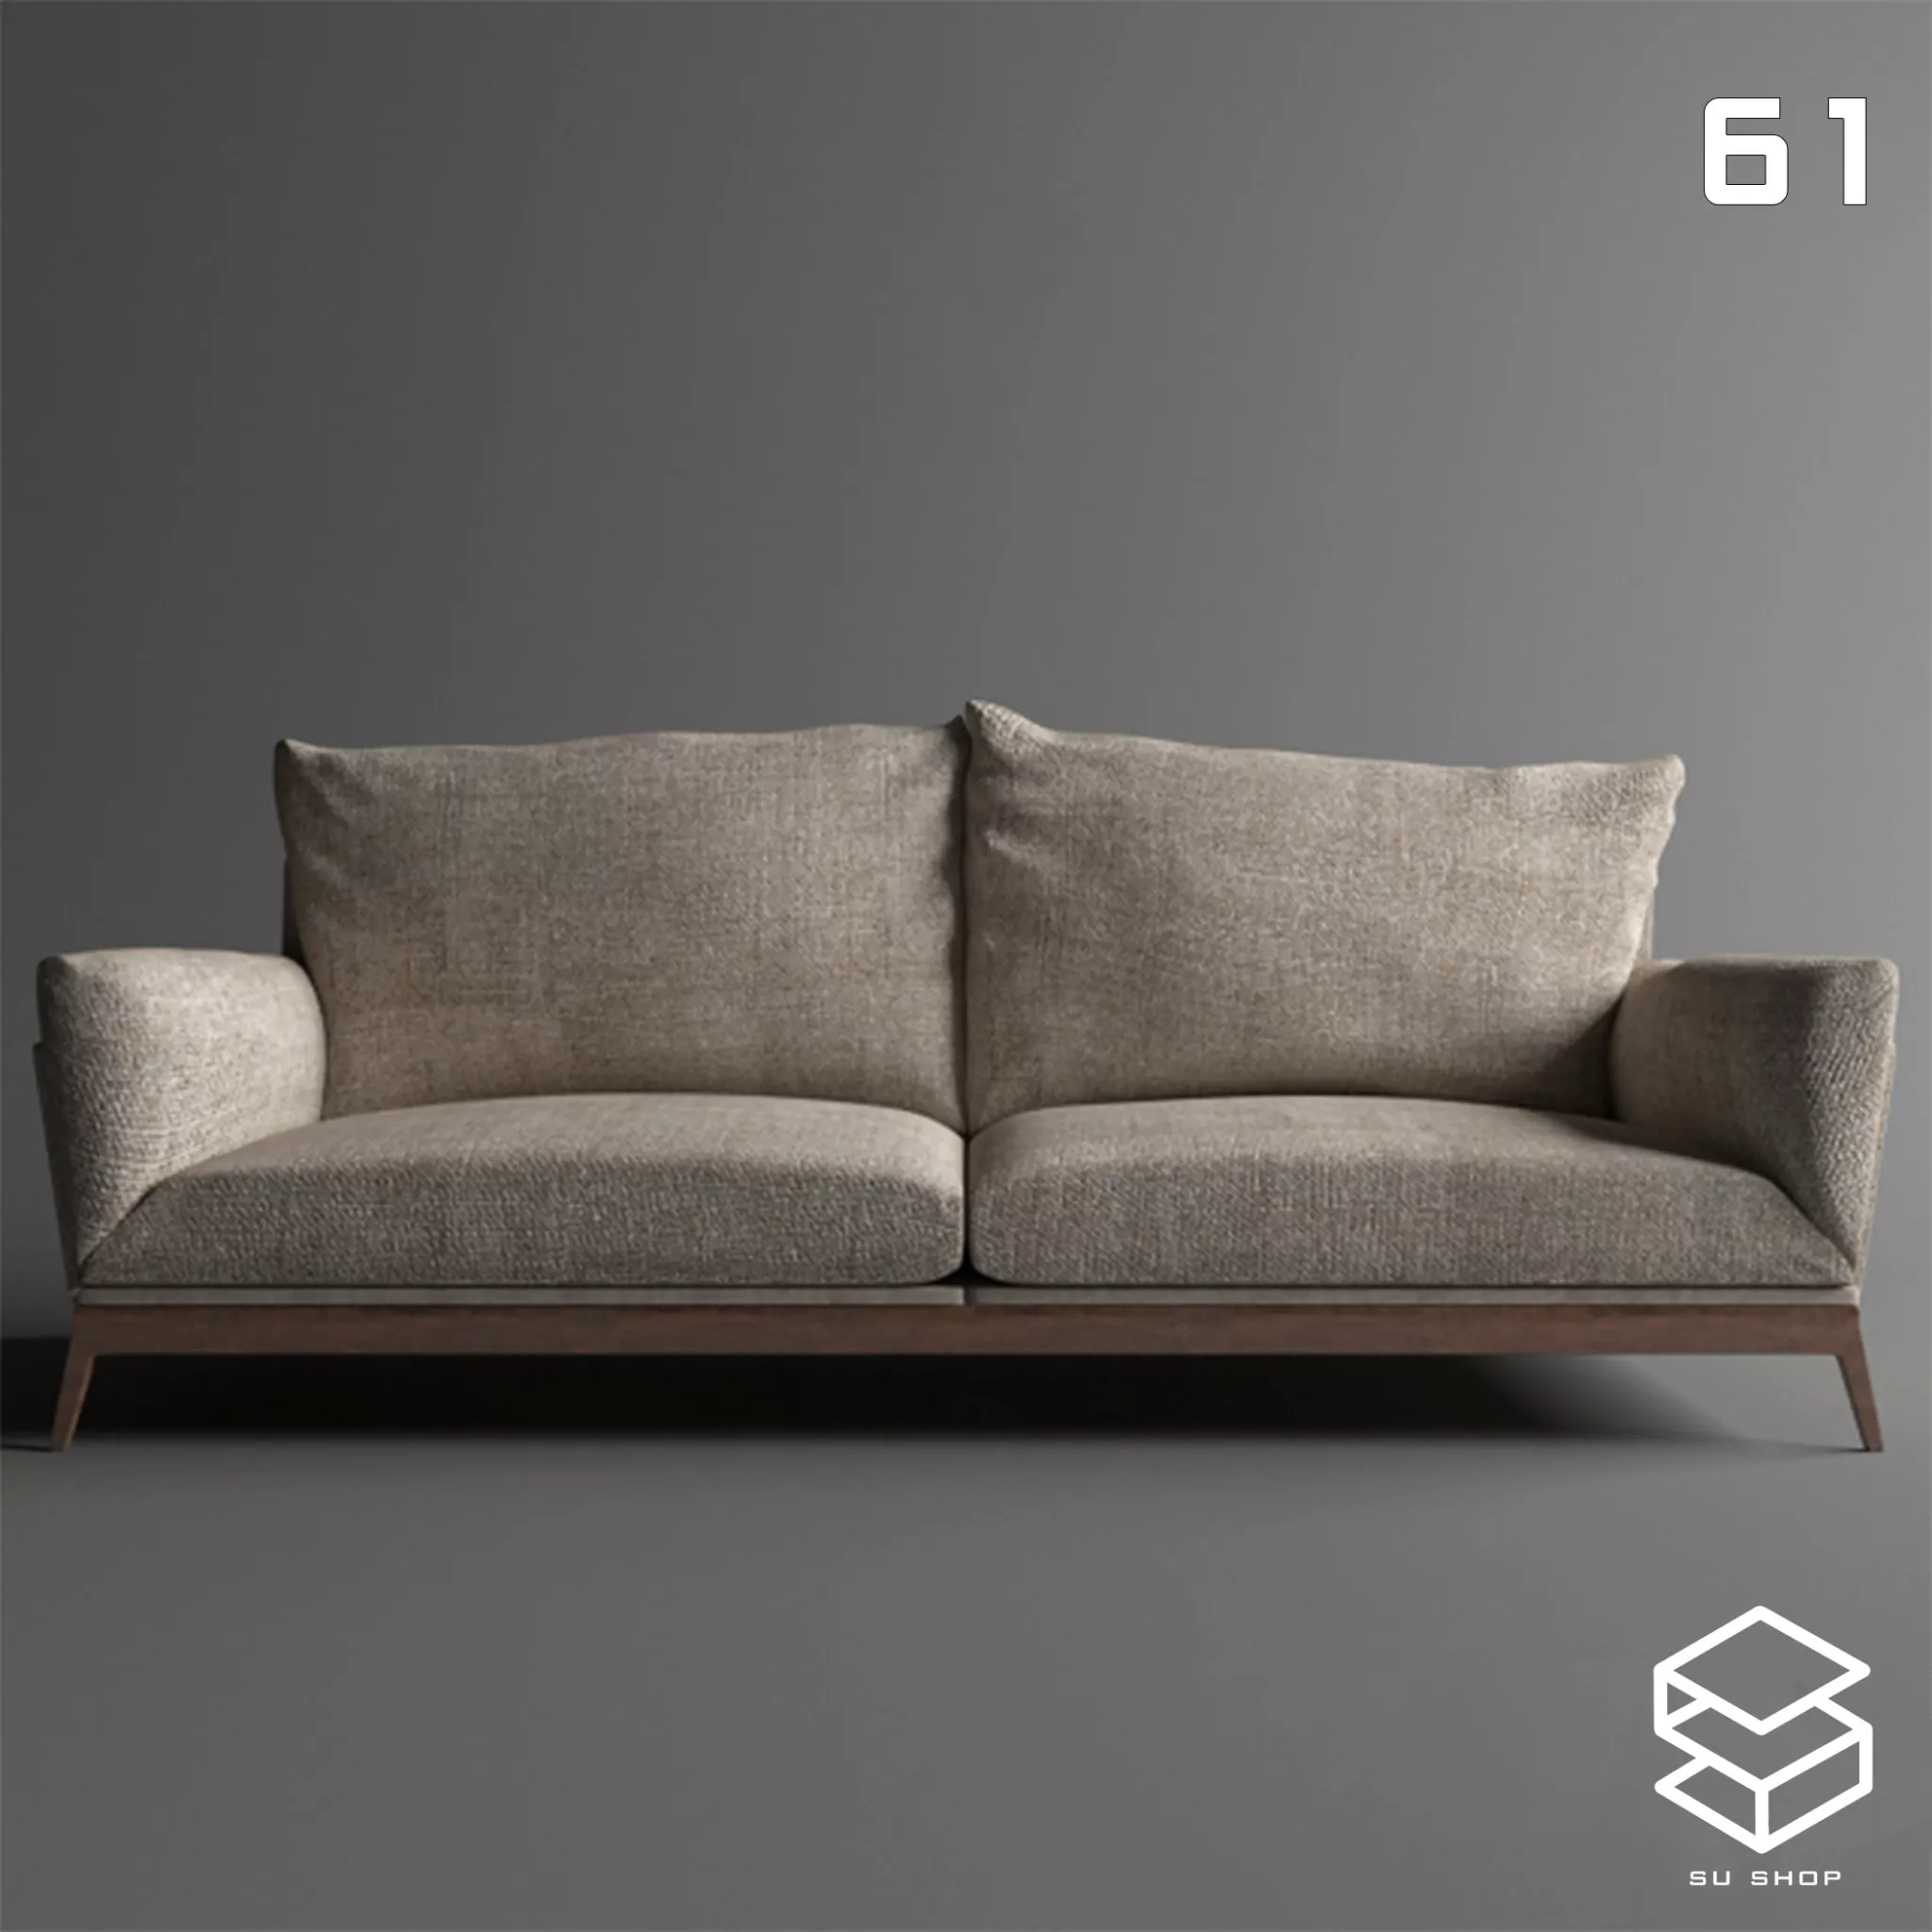 MODERN SOFA - SKETCHUP 3D MODEL - VRAY OR ENSCAPE - ID13687